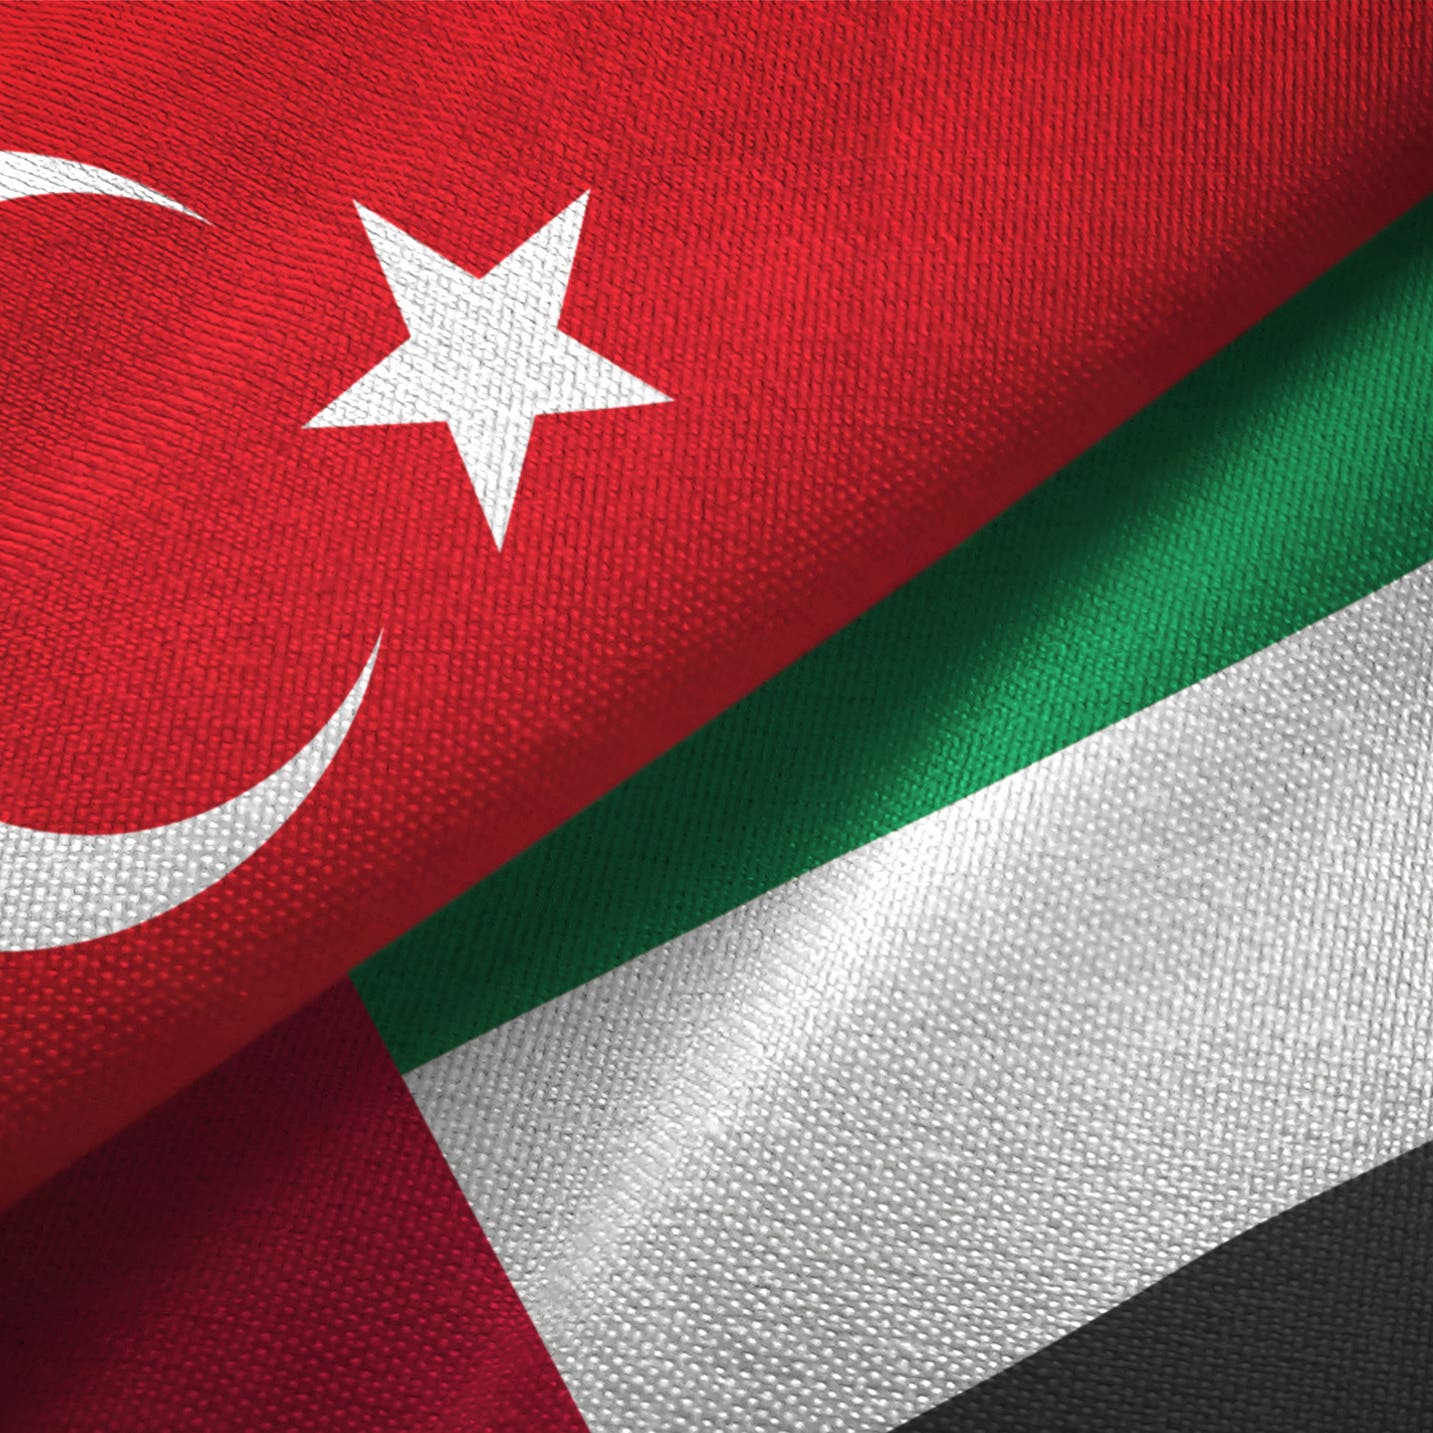 Turkey is a ‘great natural partner,’ says UAE minister